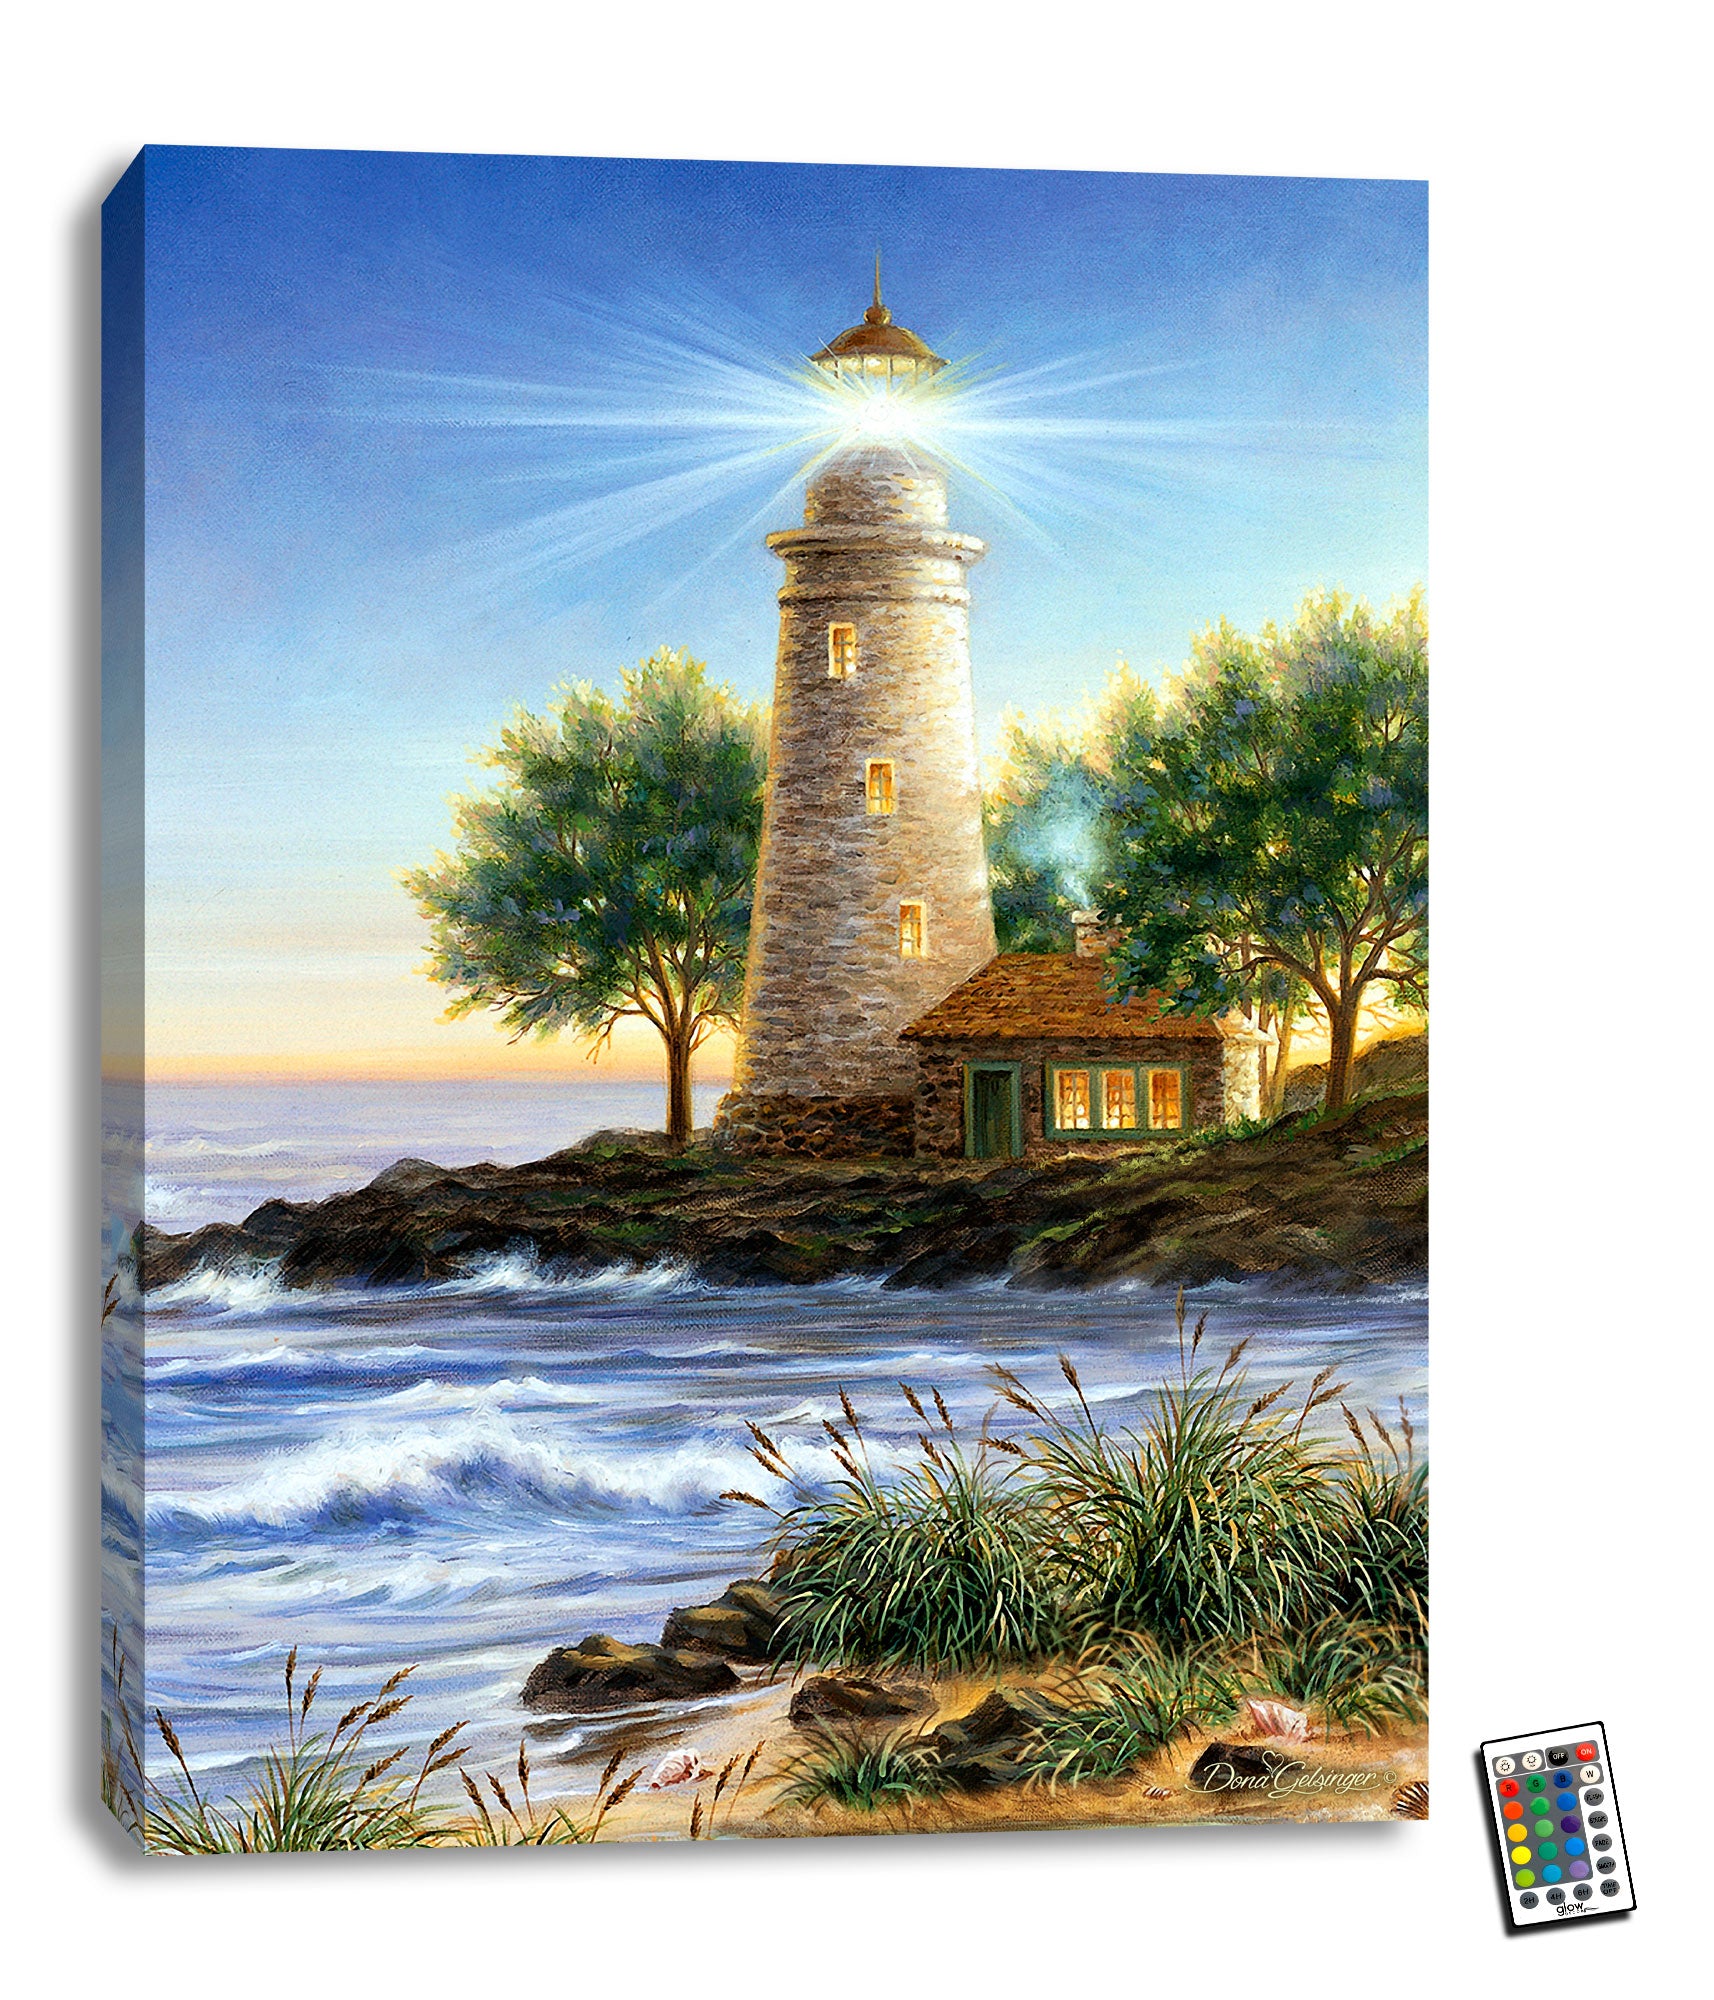 a lighthouse perched upon a rocky peninsula, coupled with the crashing waves below, creates a dynamic and captivating scene